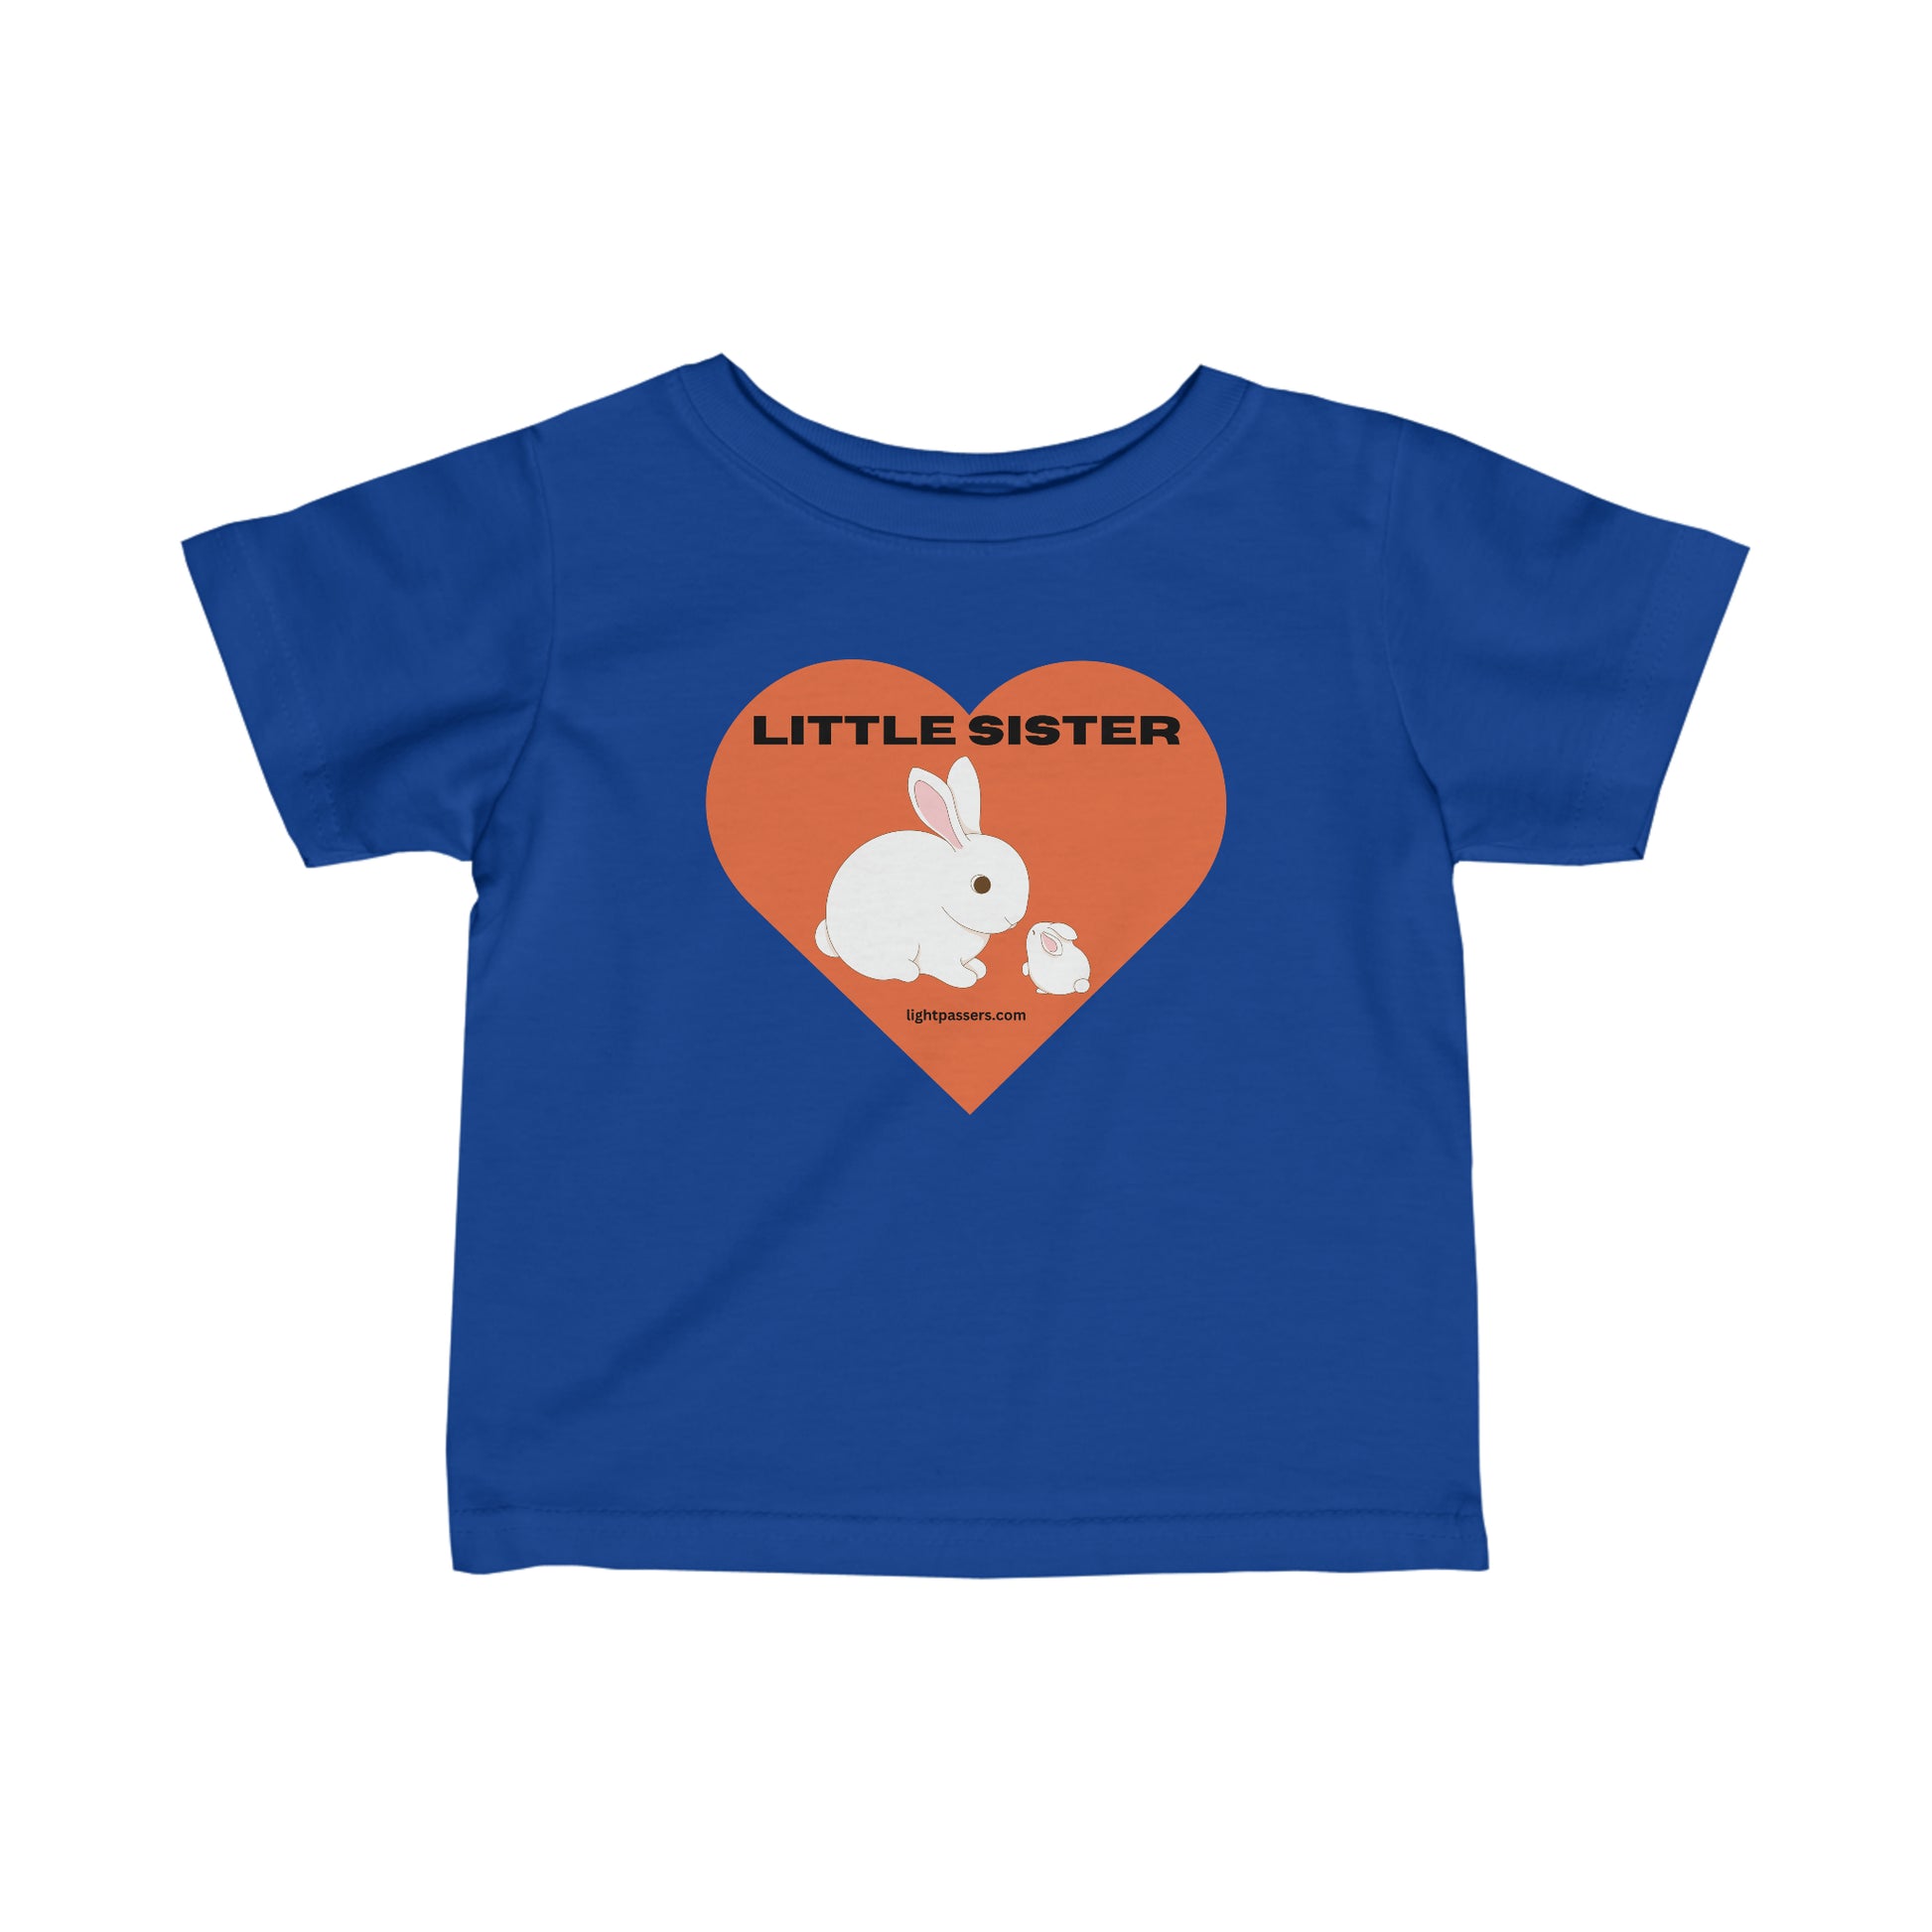 Infant fine jersey tee with a rabbit and heart design, perfect for little sisters. Side seams, ribbed knitting, and taped shoulders for durability and comfort. Classic fit, 100% combed ringspun cotton.